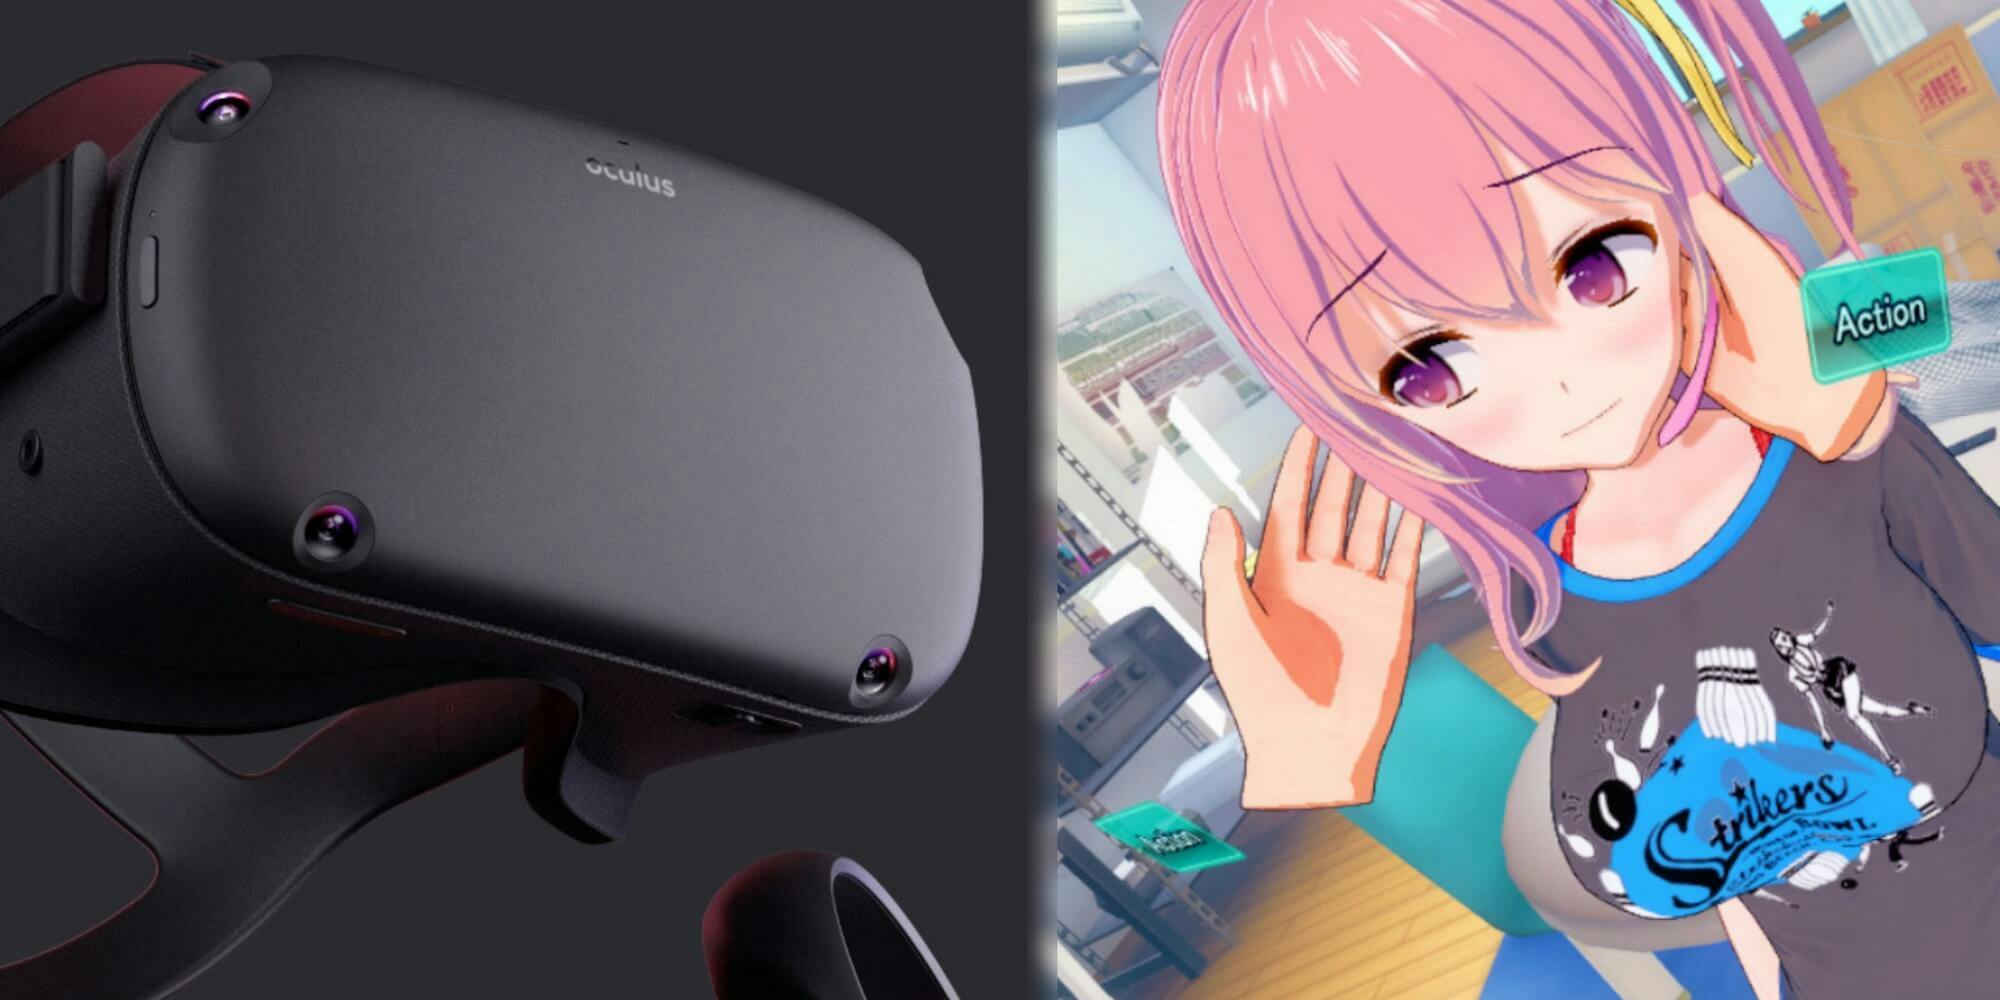 Anime Porn Oculus 18 - Oculus Quest Review: Should You Buy It For Porn?